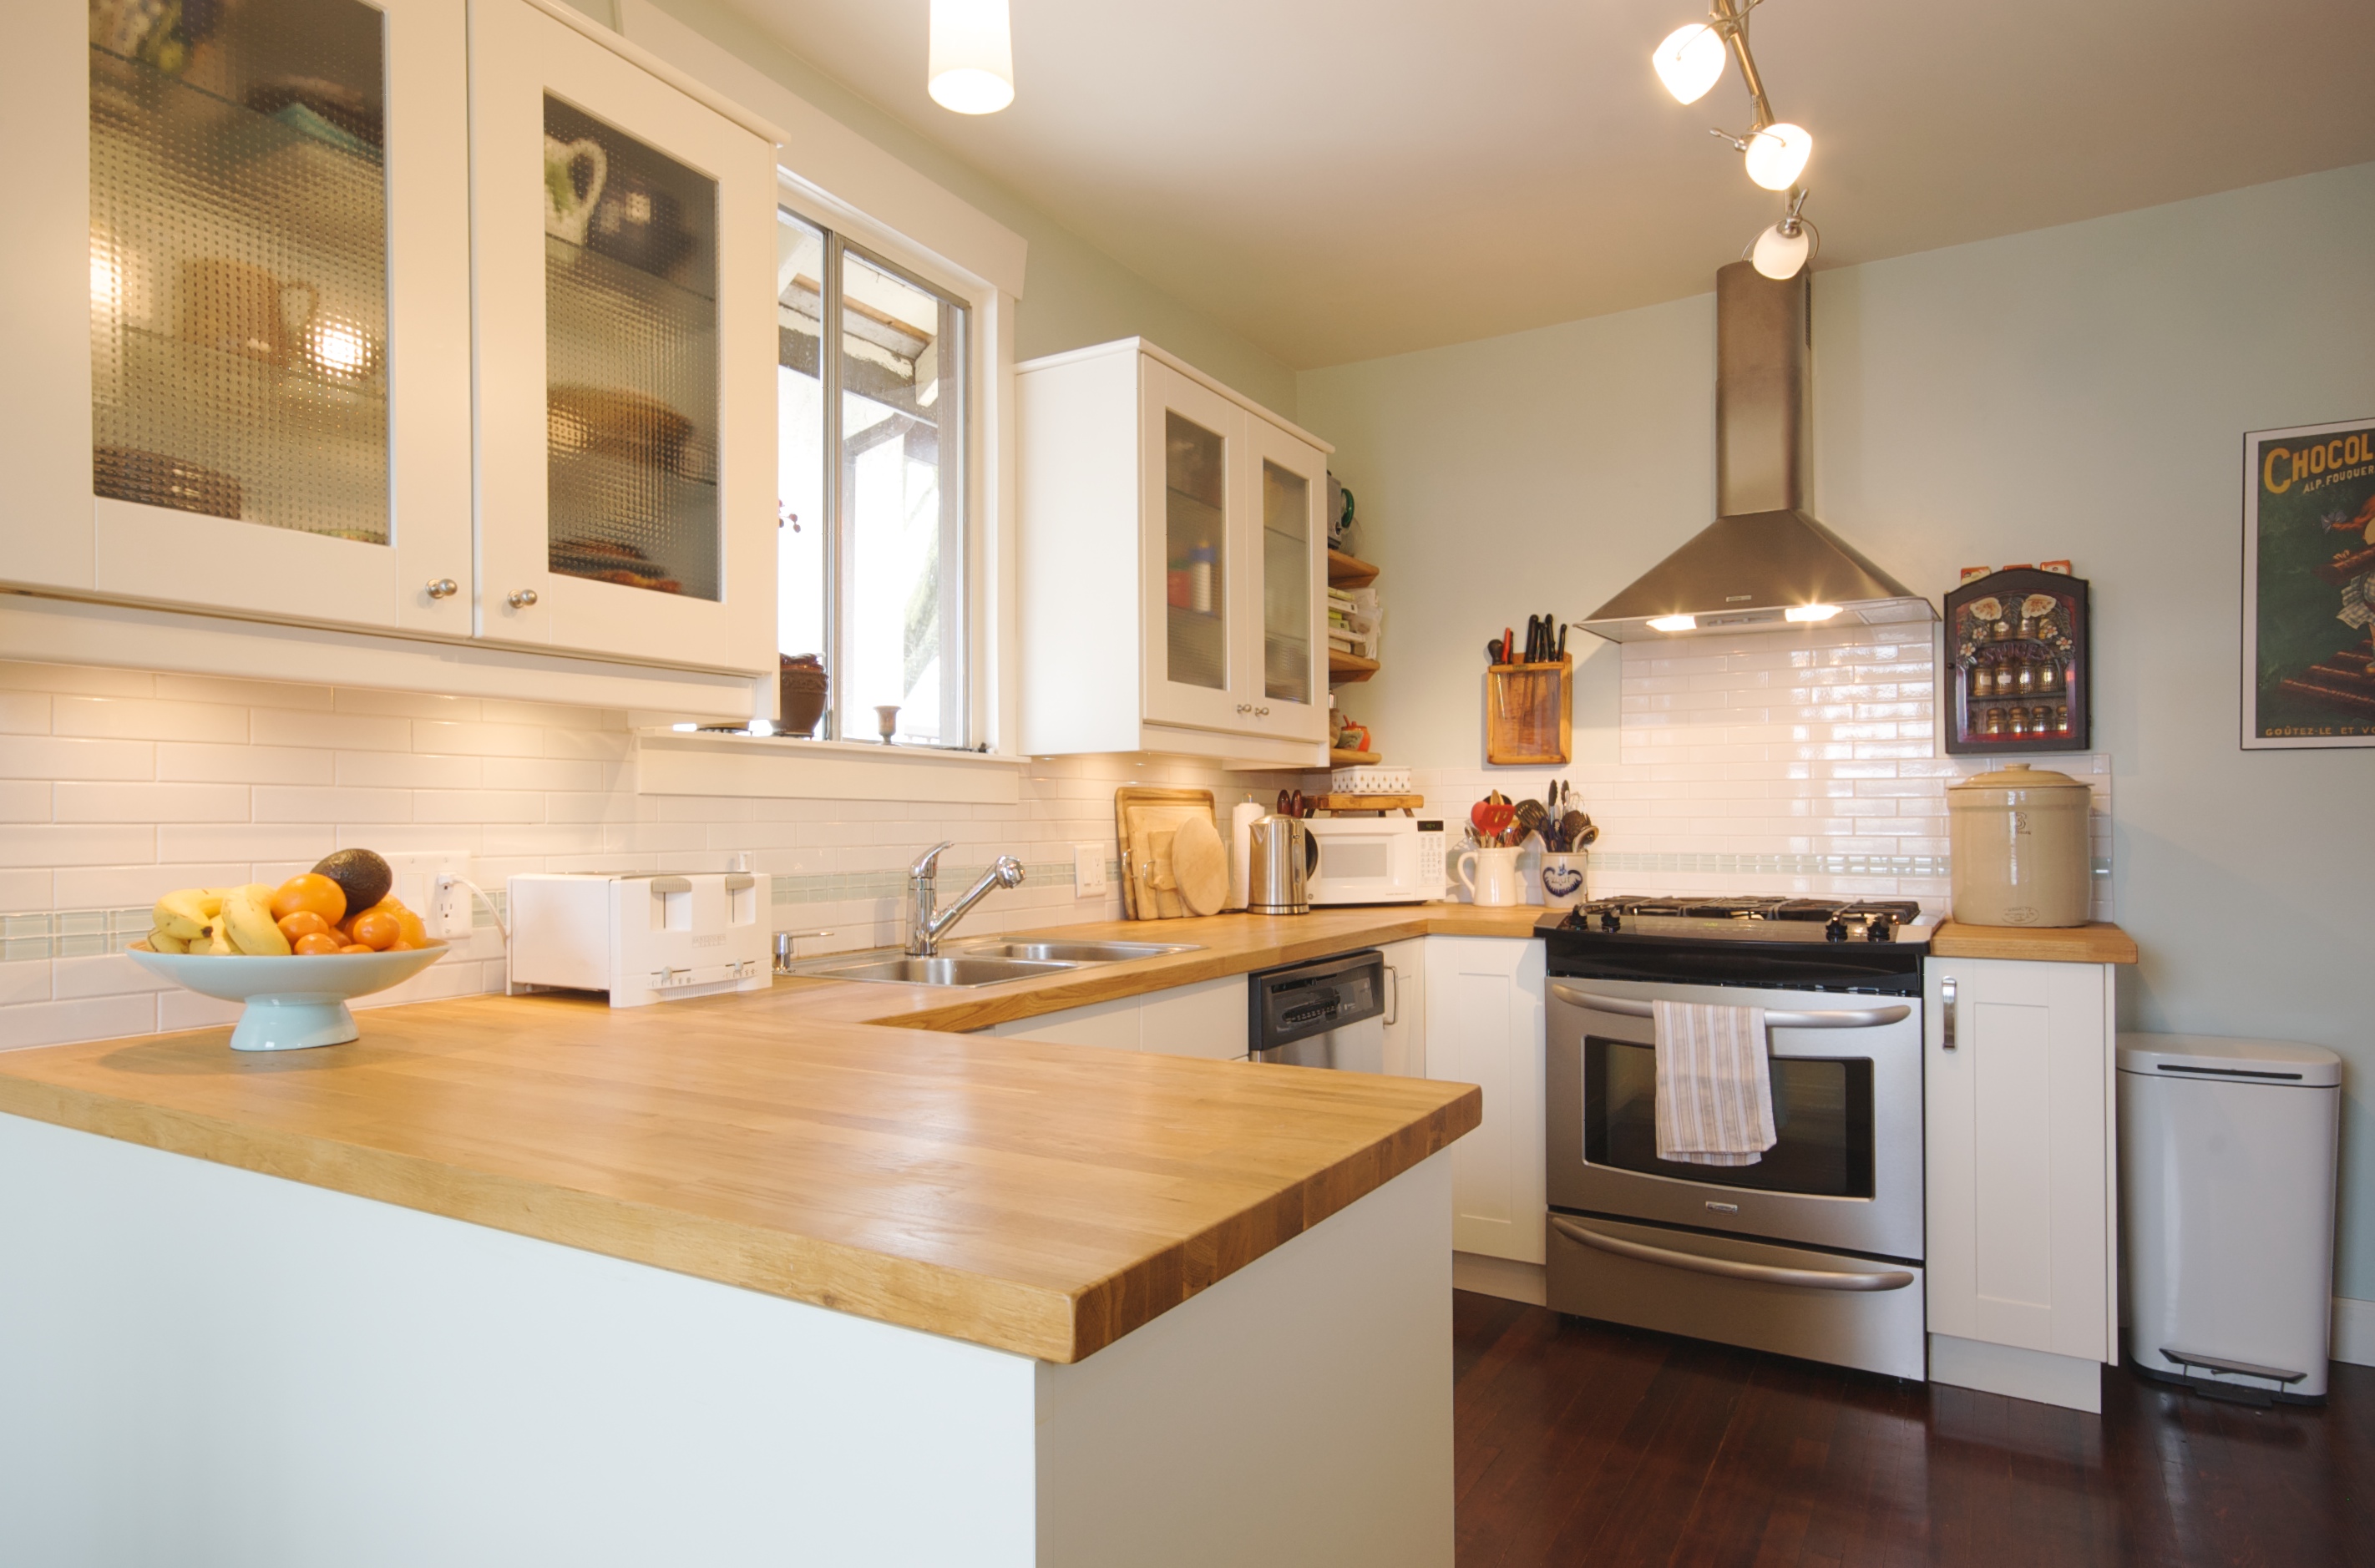 kitchen after home renovation drive - get a quote - home renovations vancouver - flipside homes